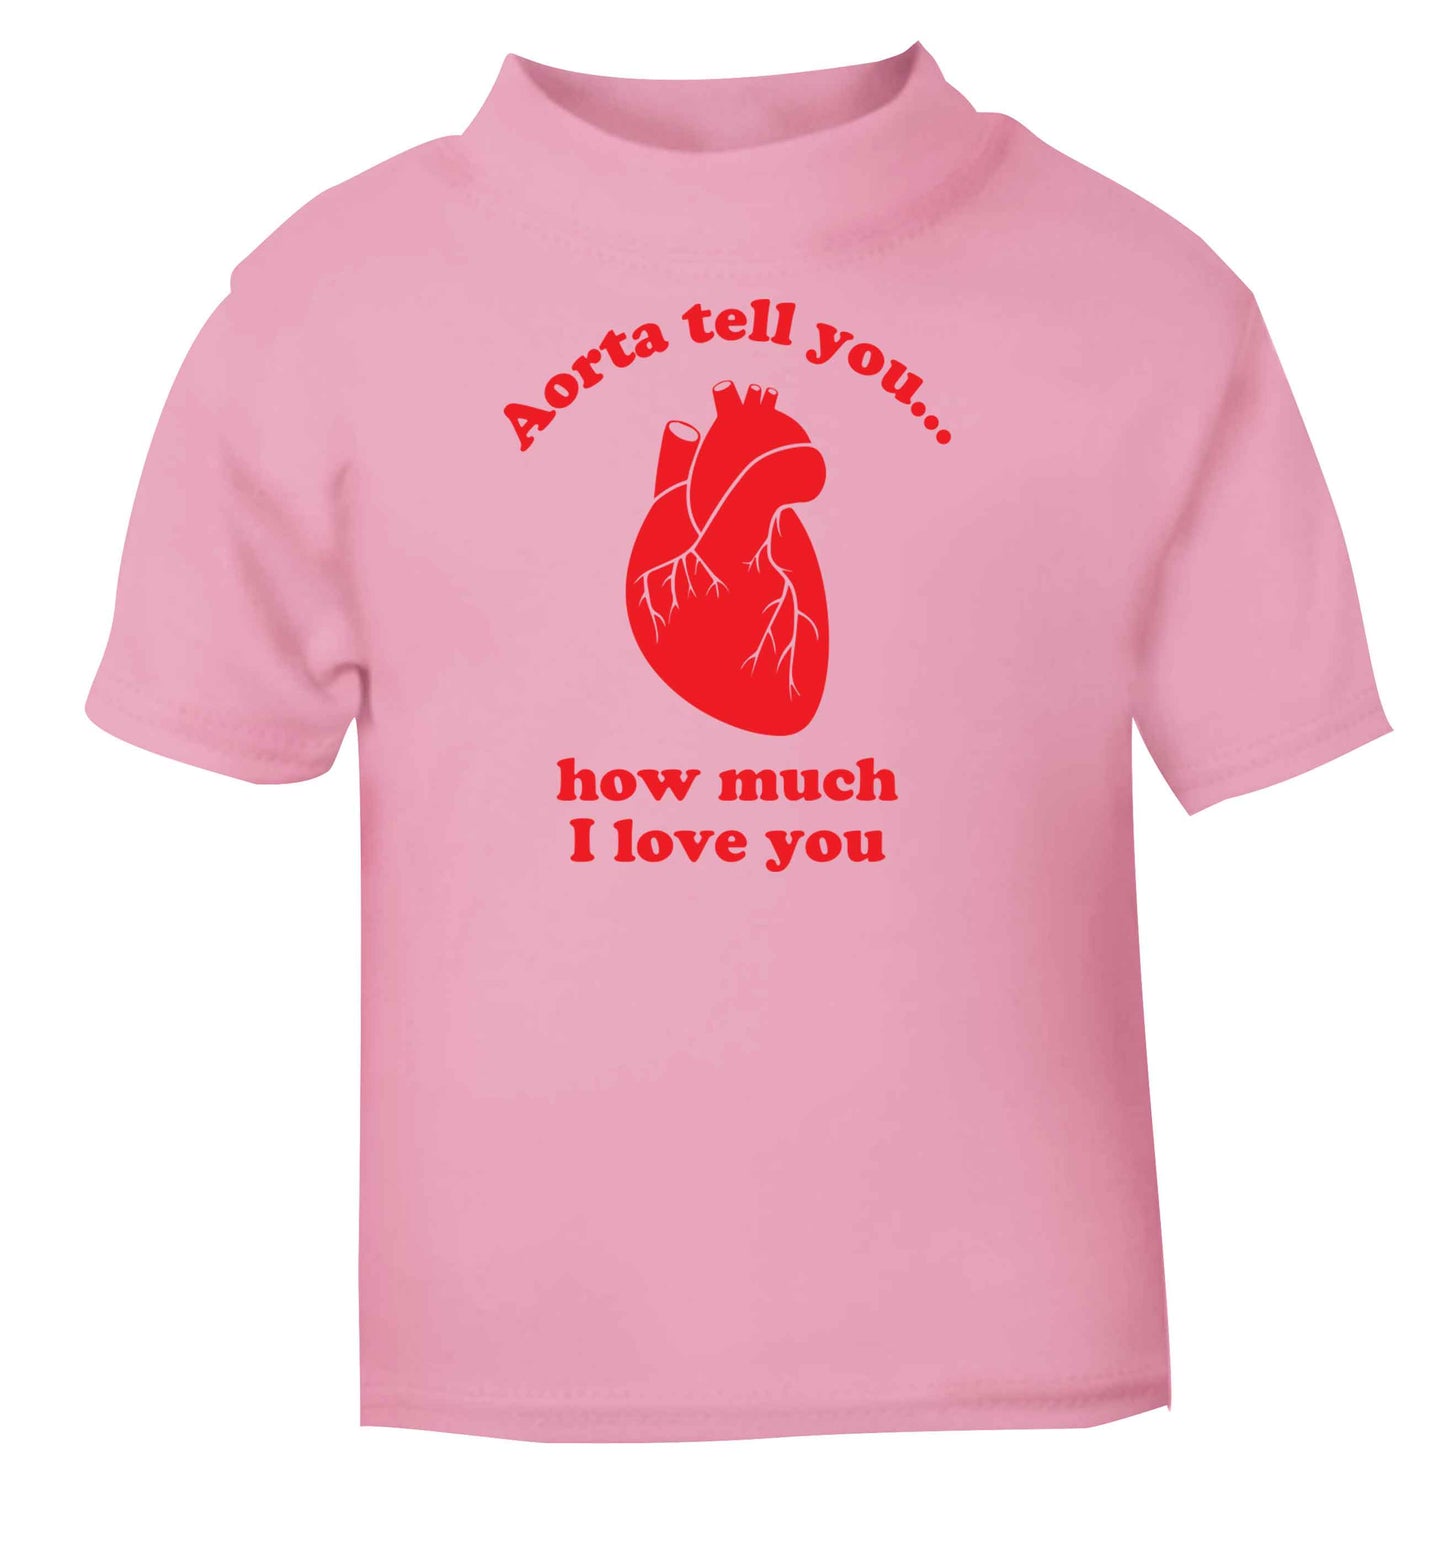 Aorta tell you how much I love you light pink baby toddler Tshirt 2 Years